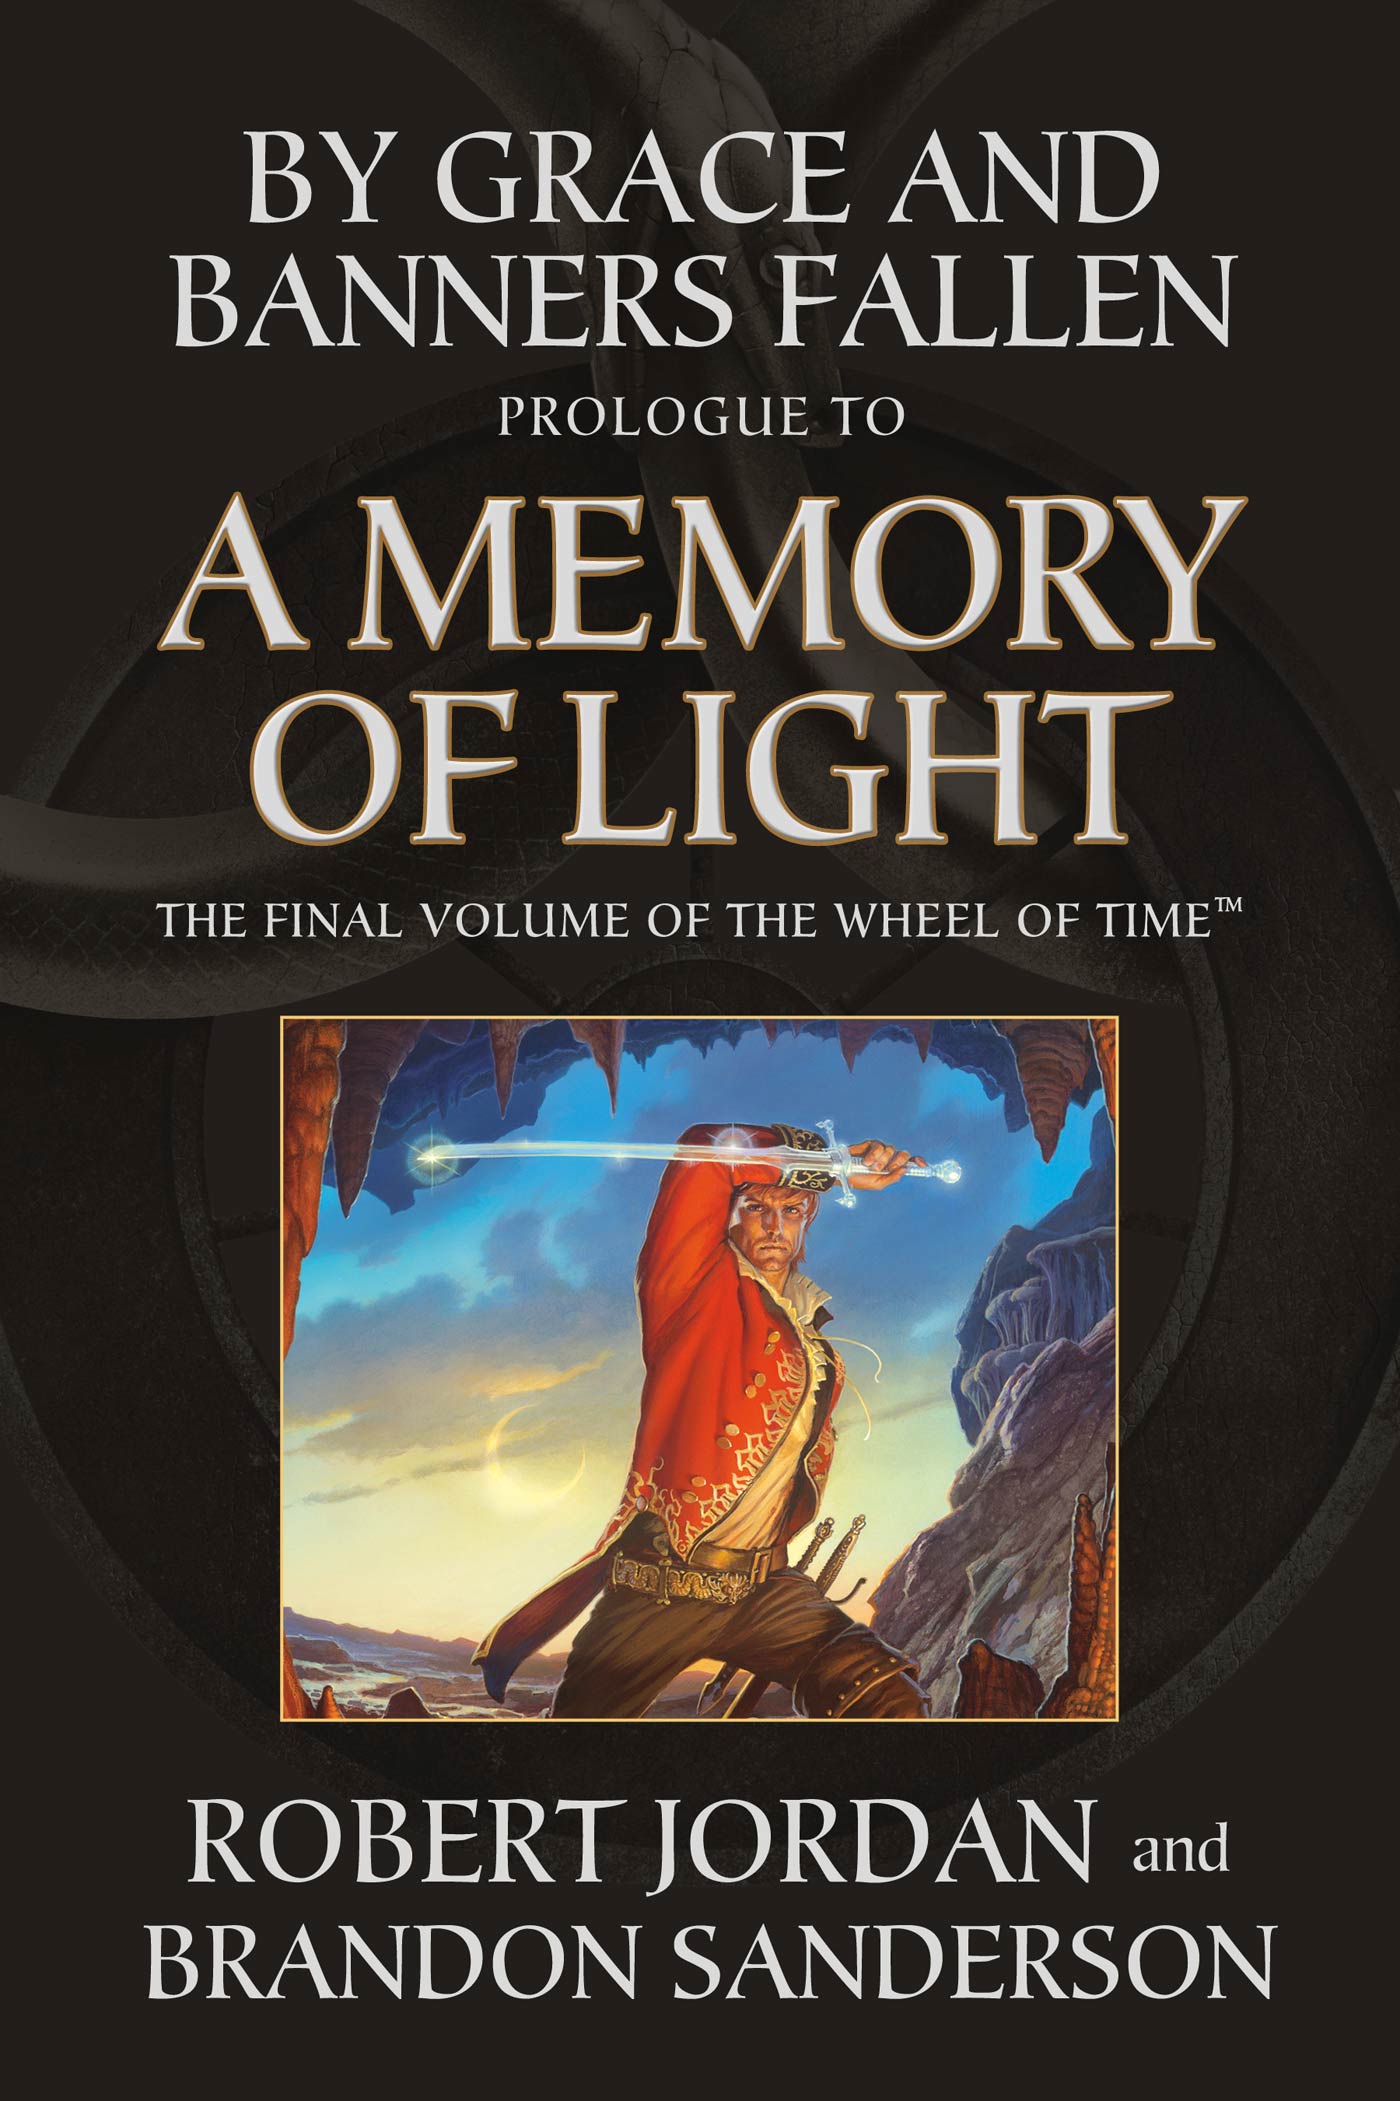 More information about "By Grace and Banners Fallen: Prologue to A Memory of Light by Robert Jordan, Brandon Sanderson"